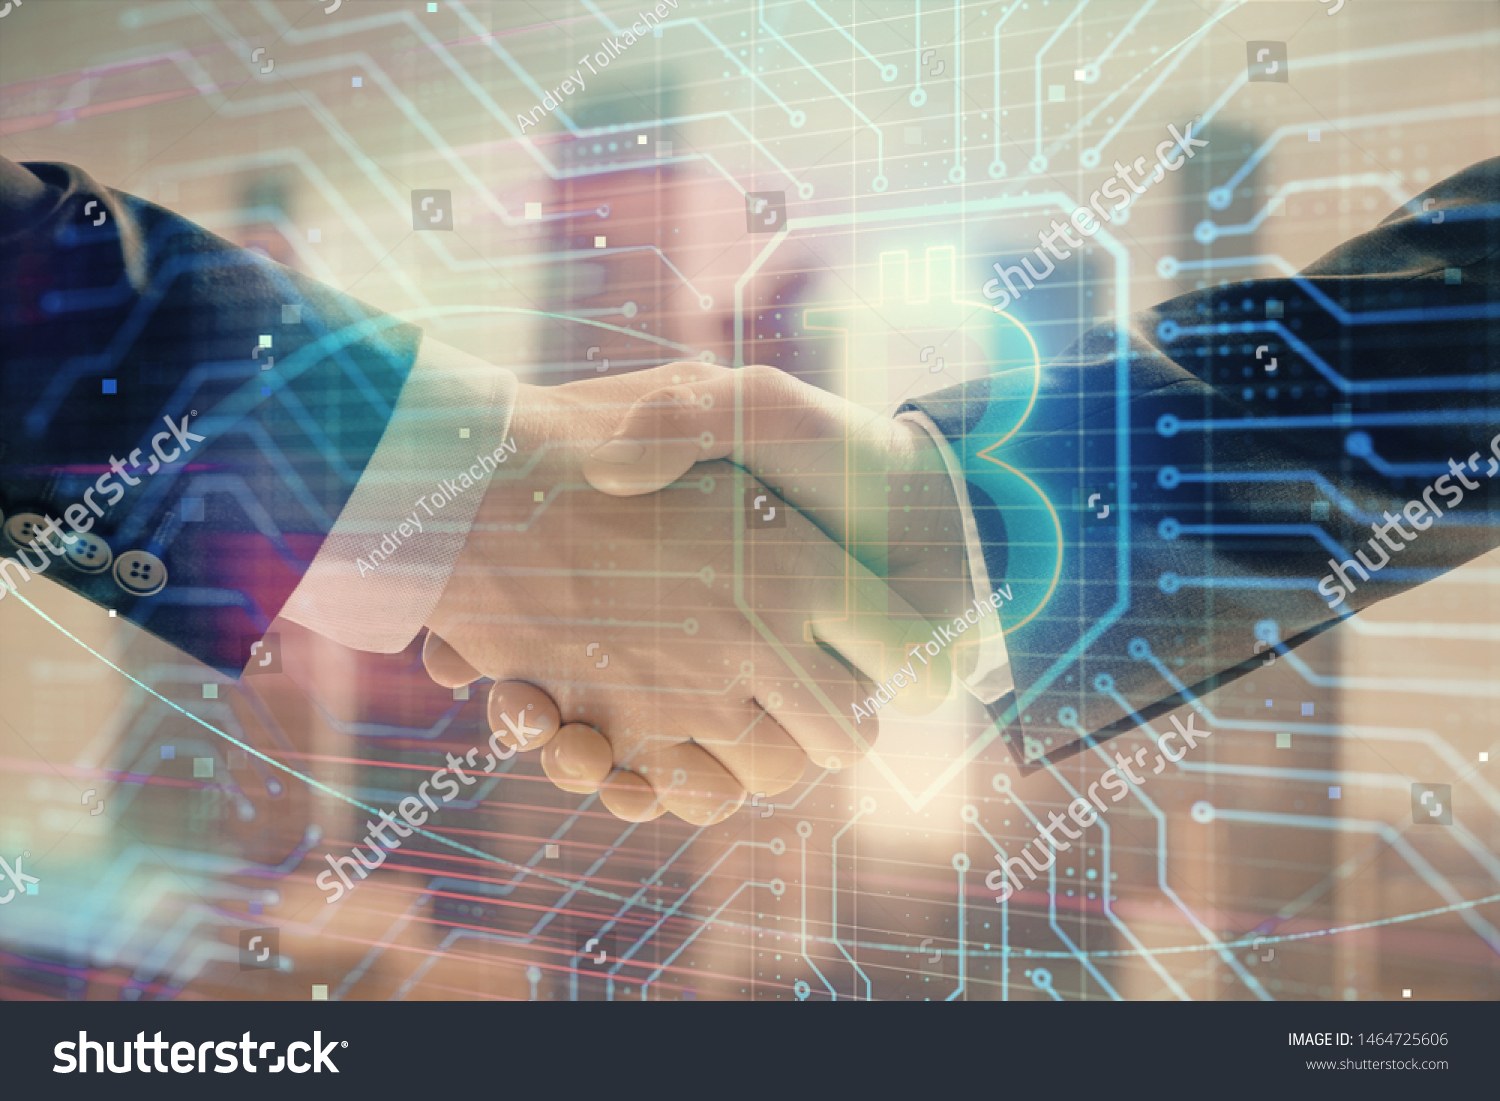 Double exposure of crypto economy theme drawing on cityscape background with handshake. Concept of partnership and blockchain #1464725606